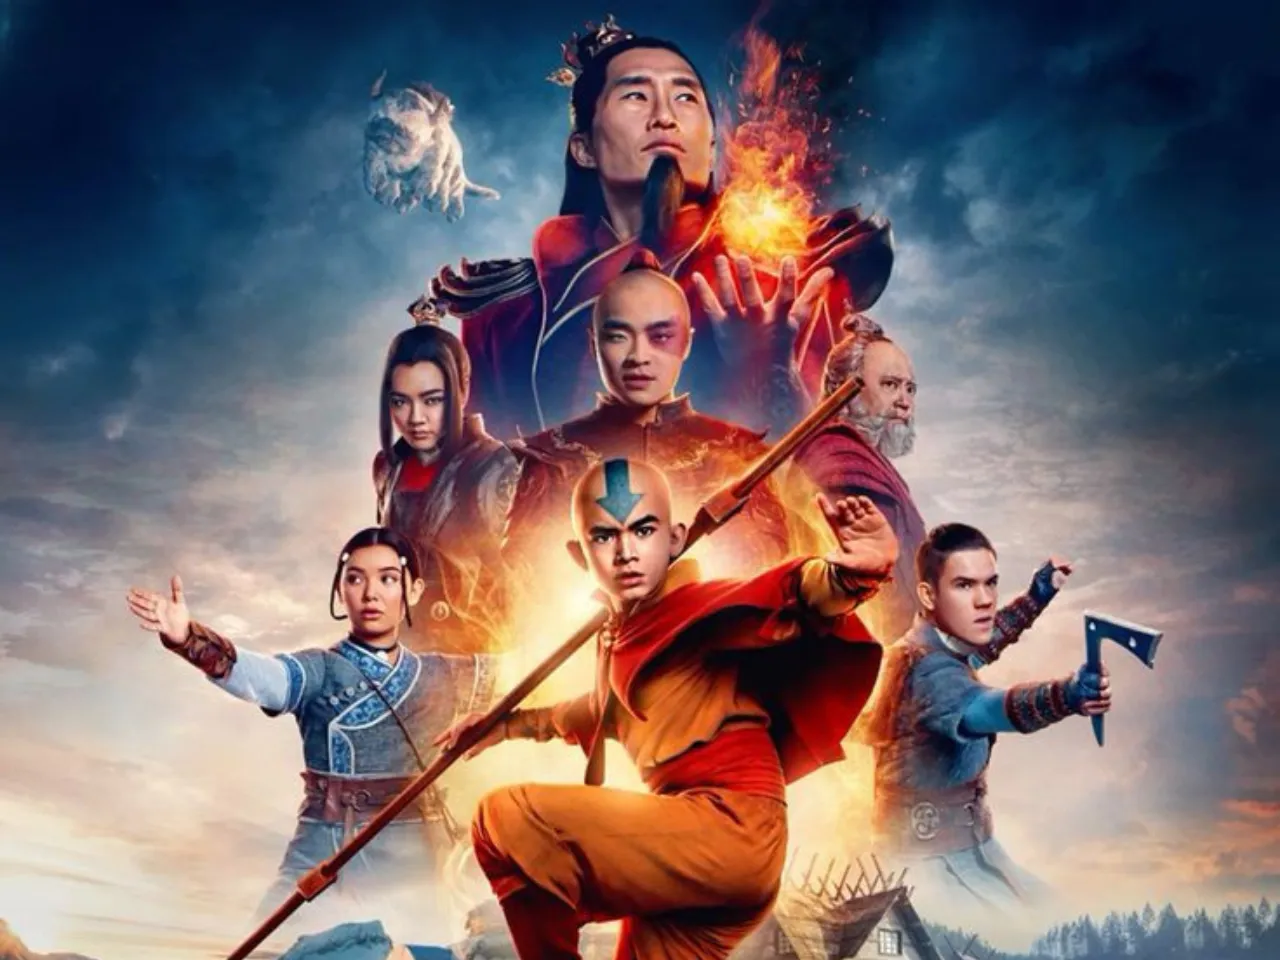 Netflix's Avatar: The Last Airbender delivers an enjoyable watching experience despite lacking the magic of the original